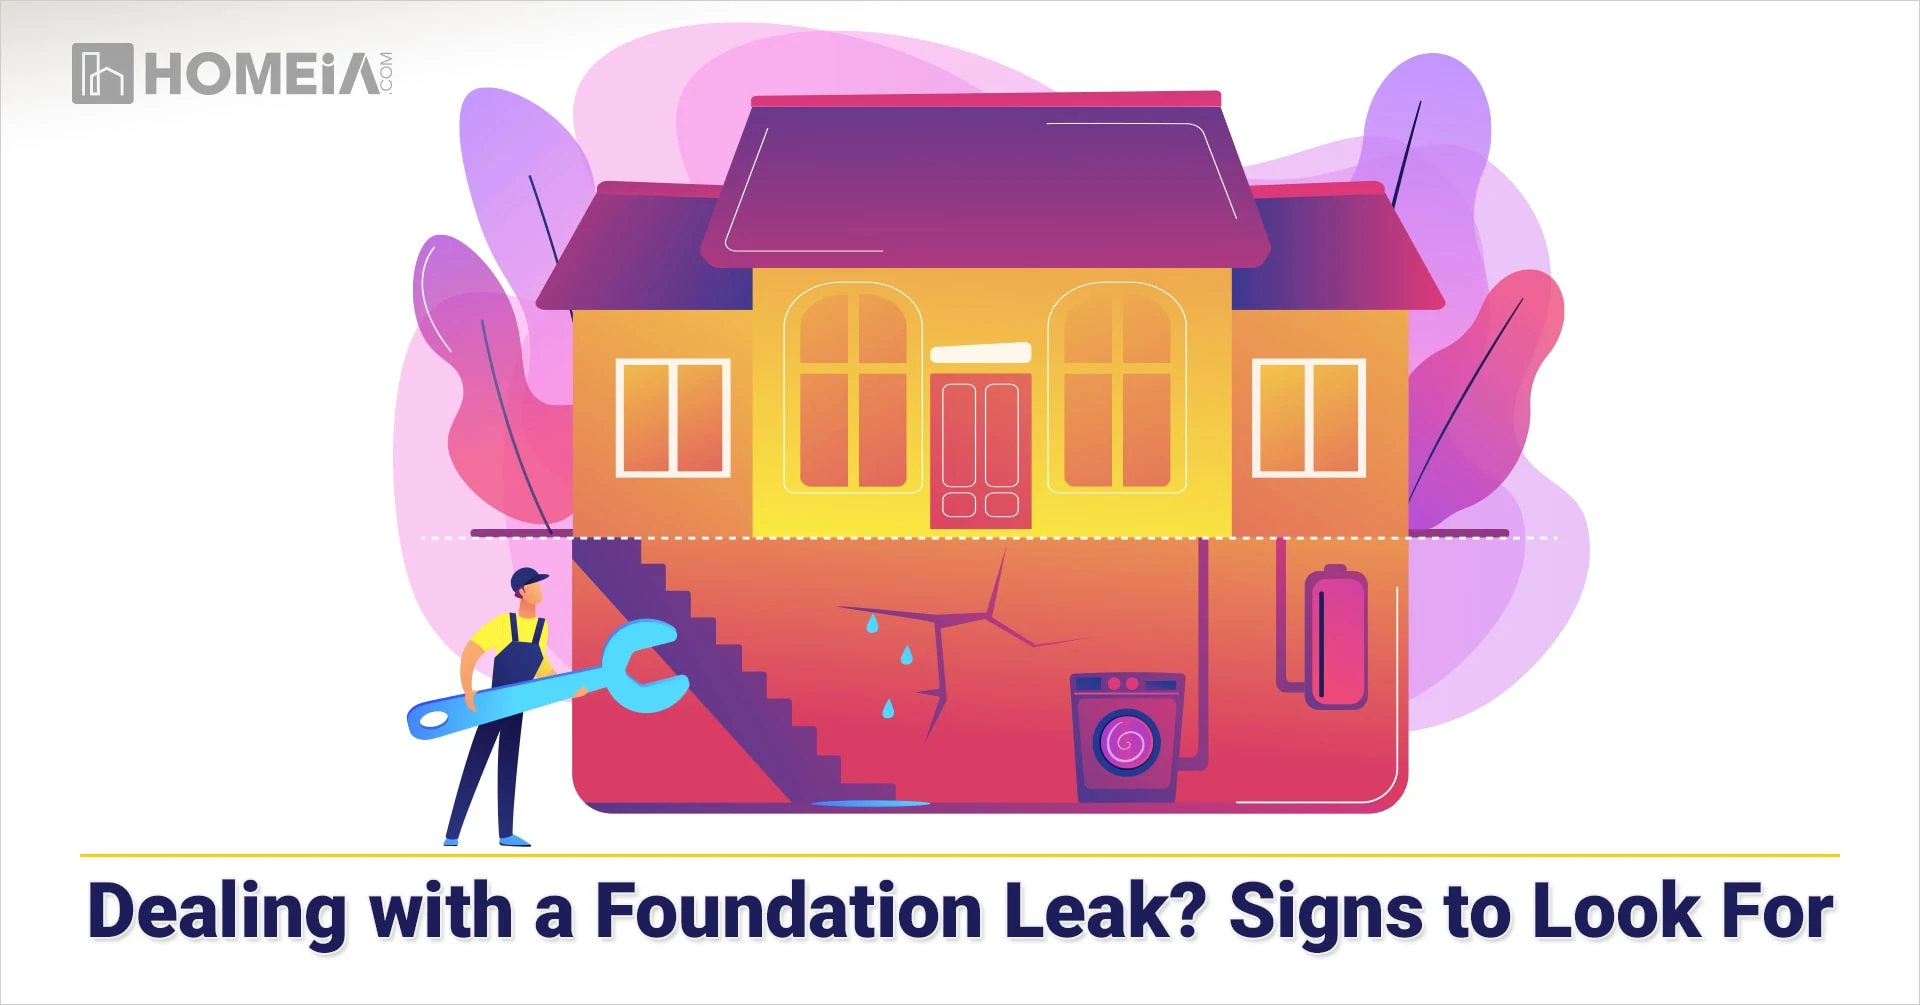 Dealing with a Foundation Leak? Signs to Look For